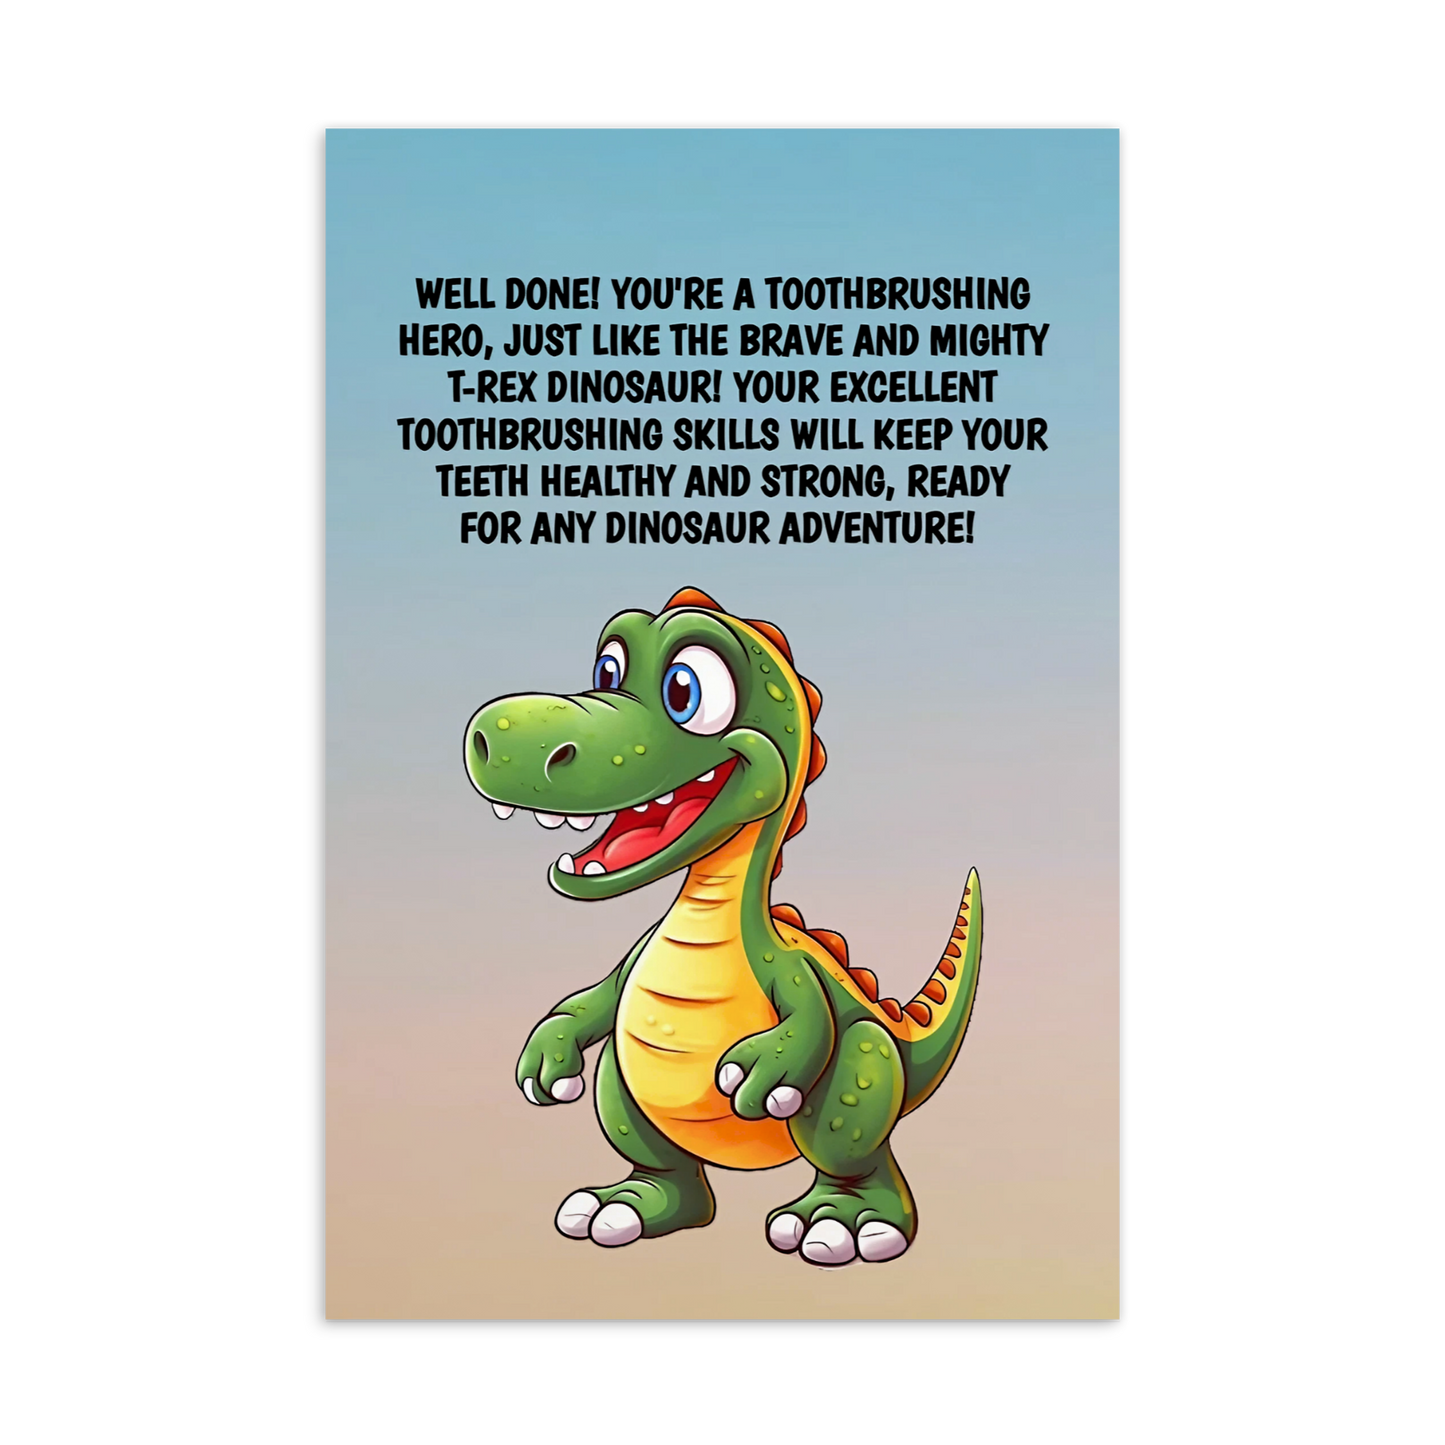 Jurassic Park | Dental Motivational & Reward Cards- Well Done! You're A Toothbrushing Hero, Just Like The Brave And Mighty T-Rex Dinosaur